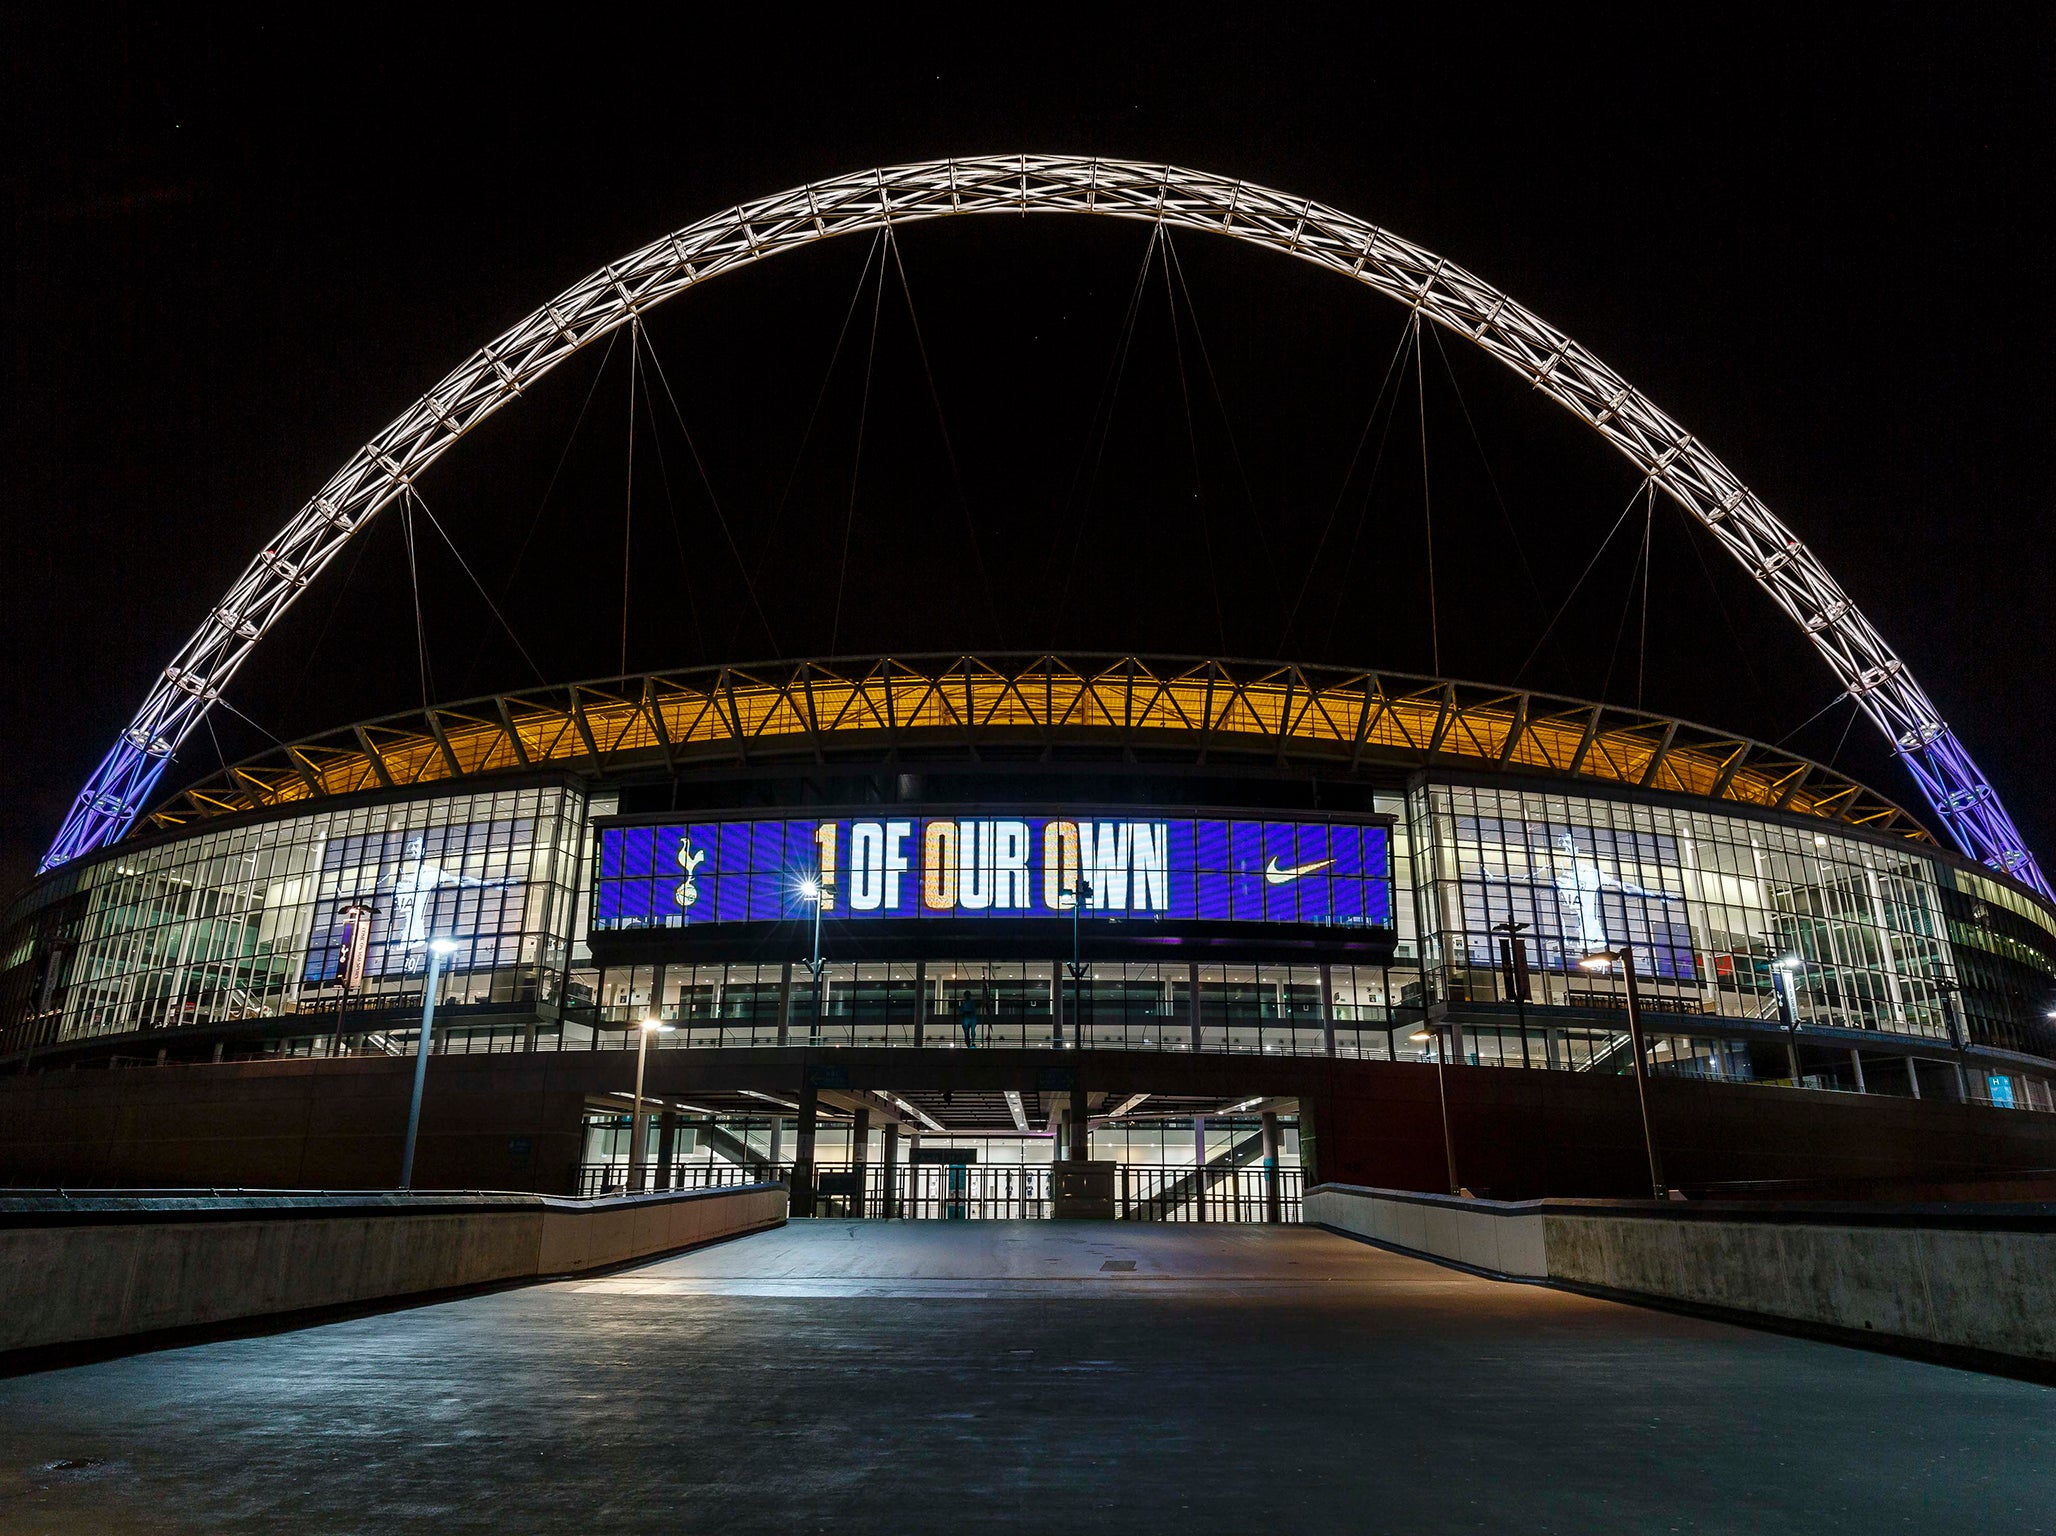 Wembley lit up in honour of Kane